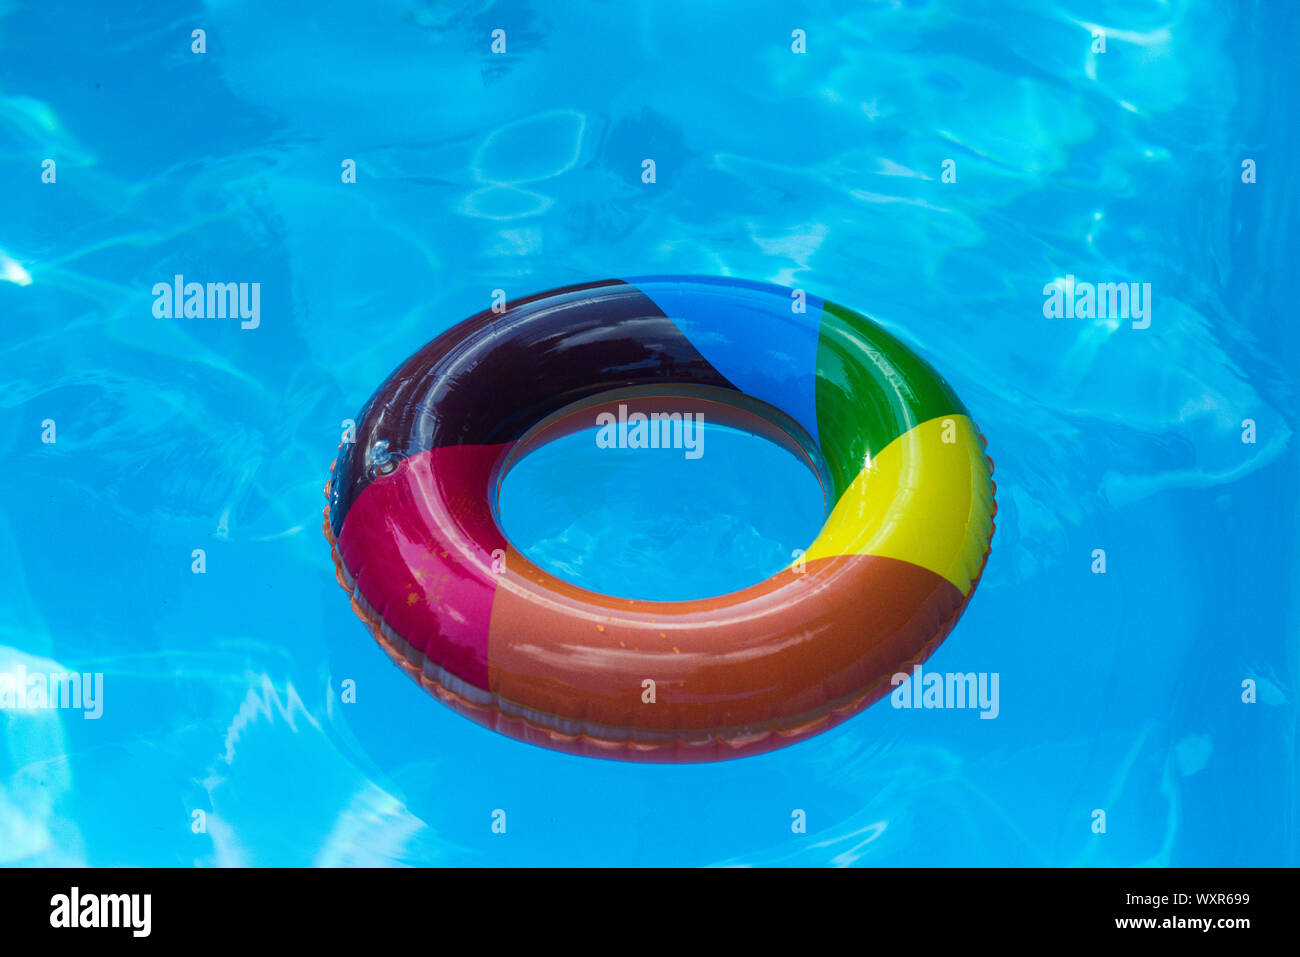 Premium Photo | Close up yellow swimming pool ring float in blue water